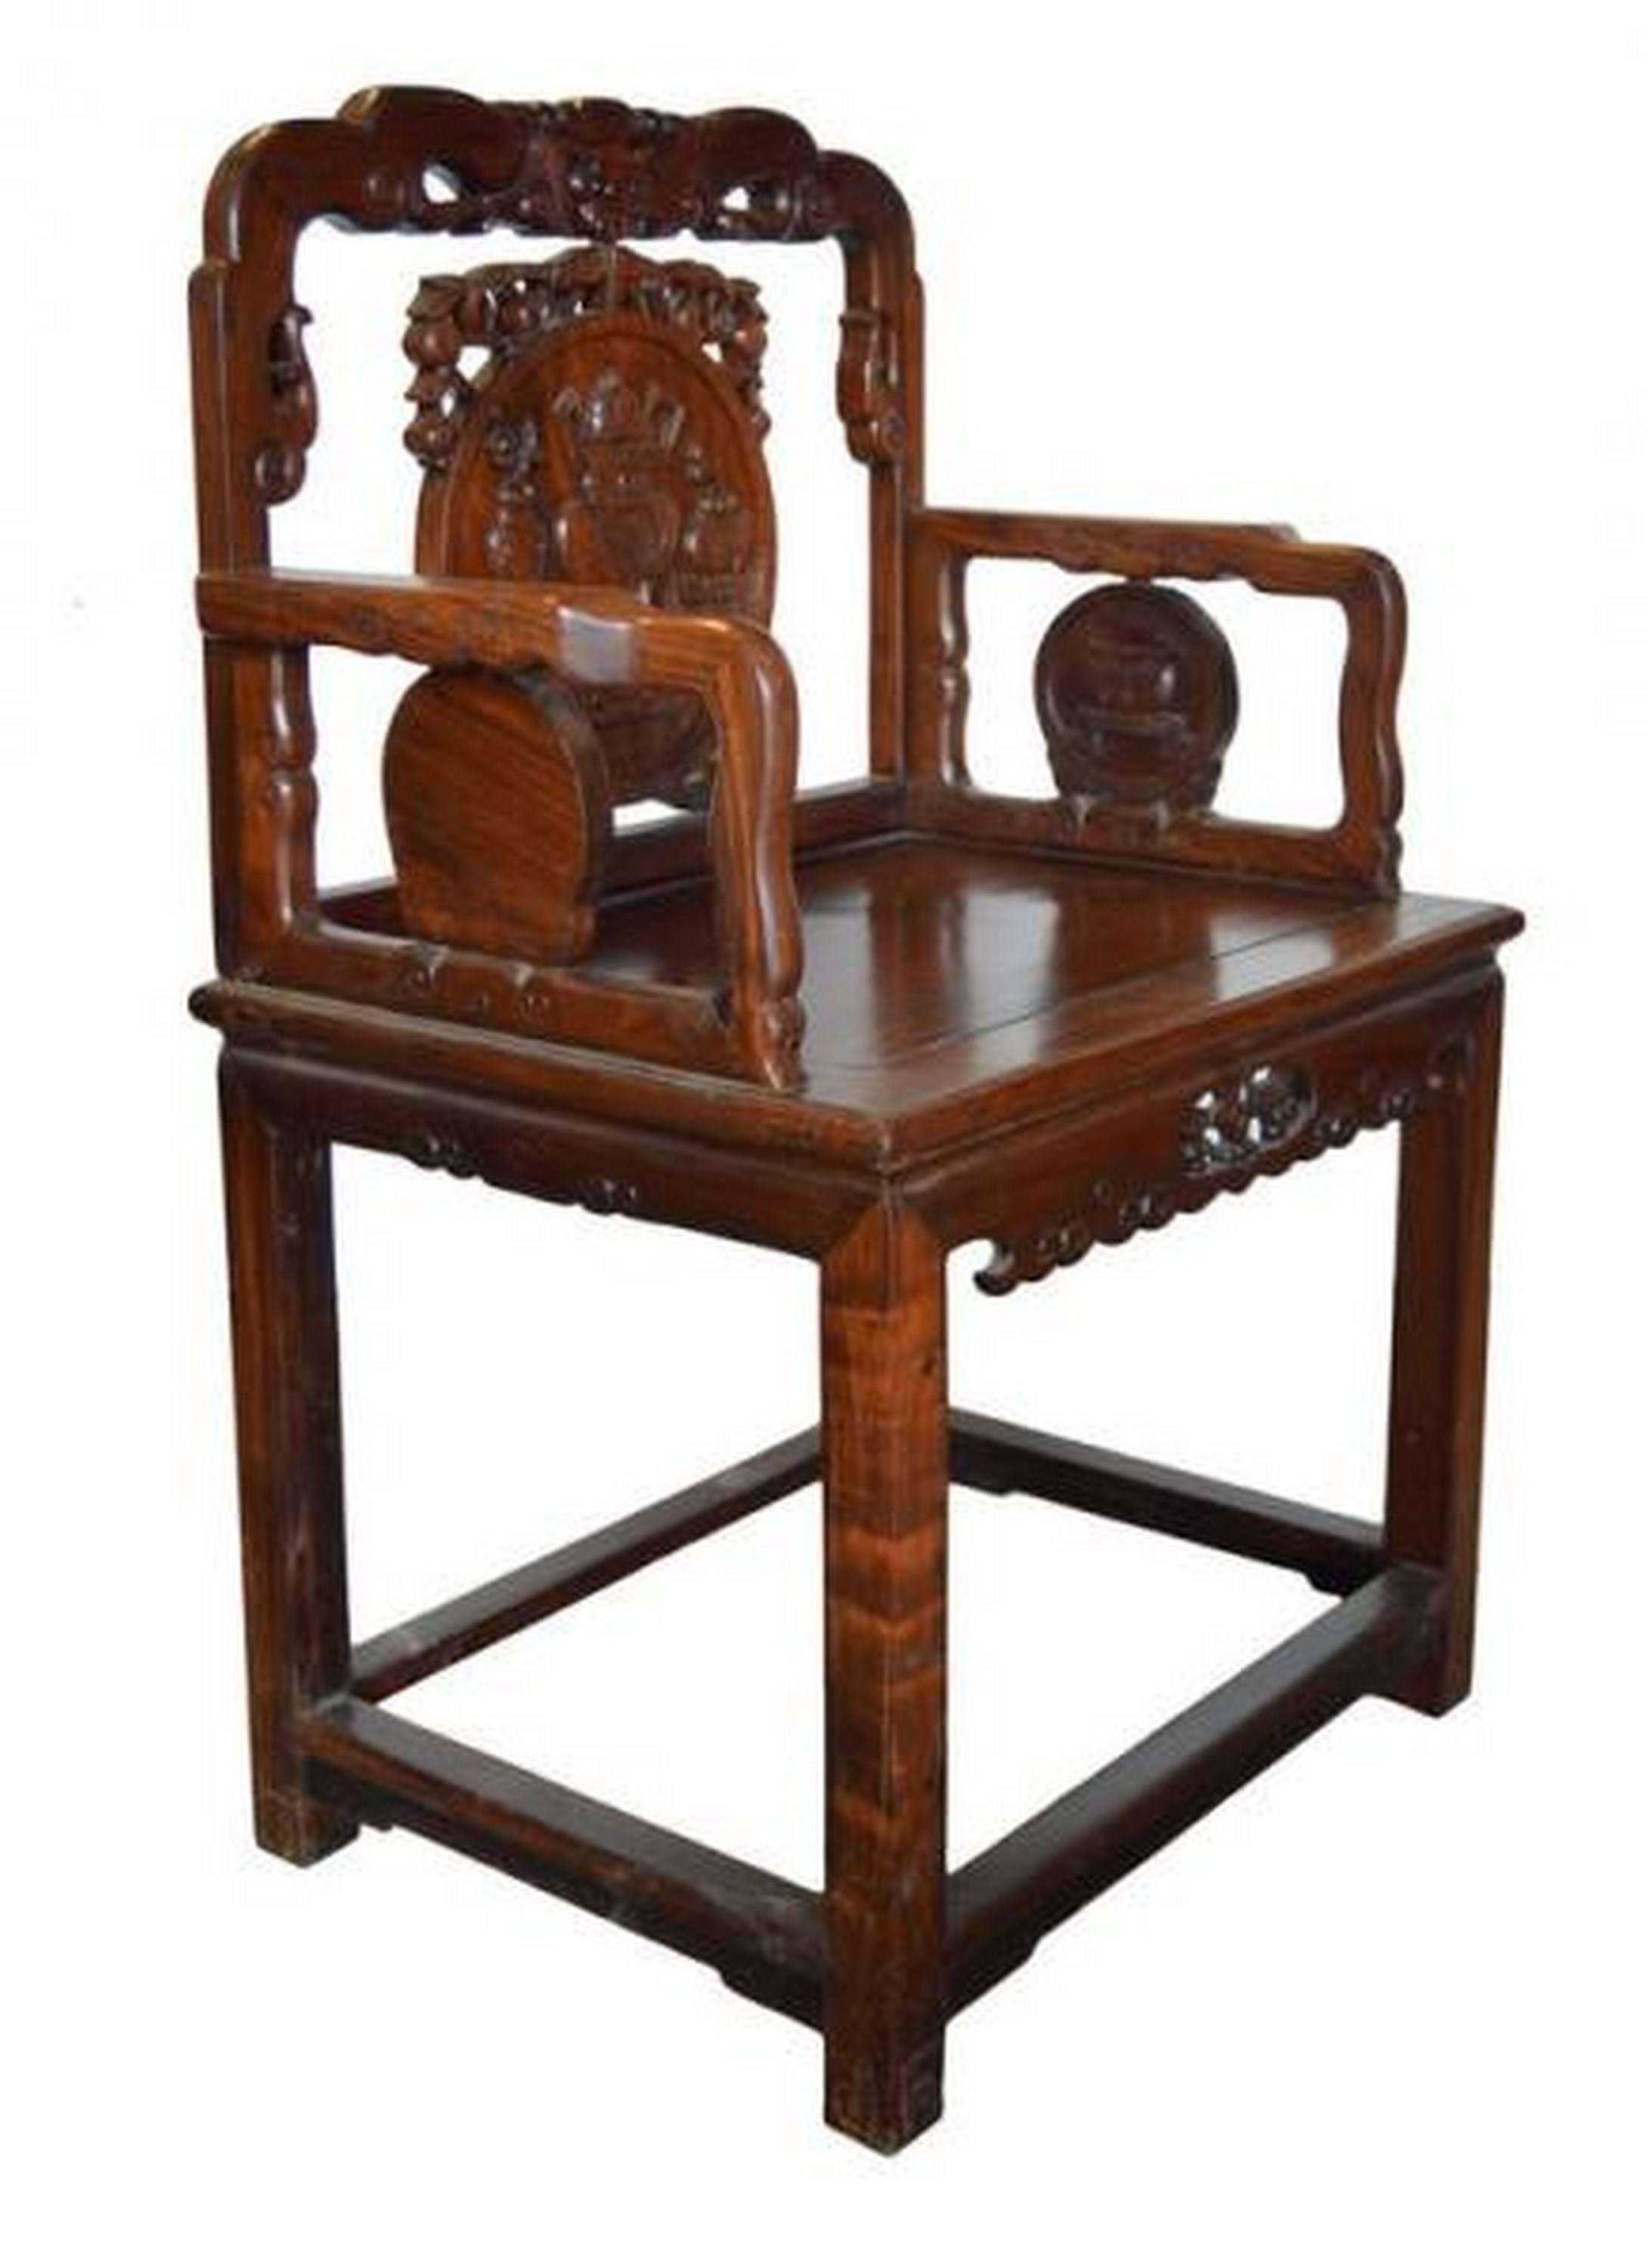 Unusual antique Chinese chair, dark brown lacquer, hand-carved traditional oriental motifs.